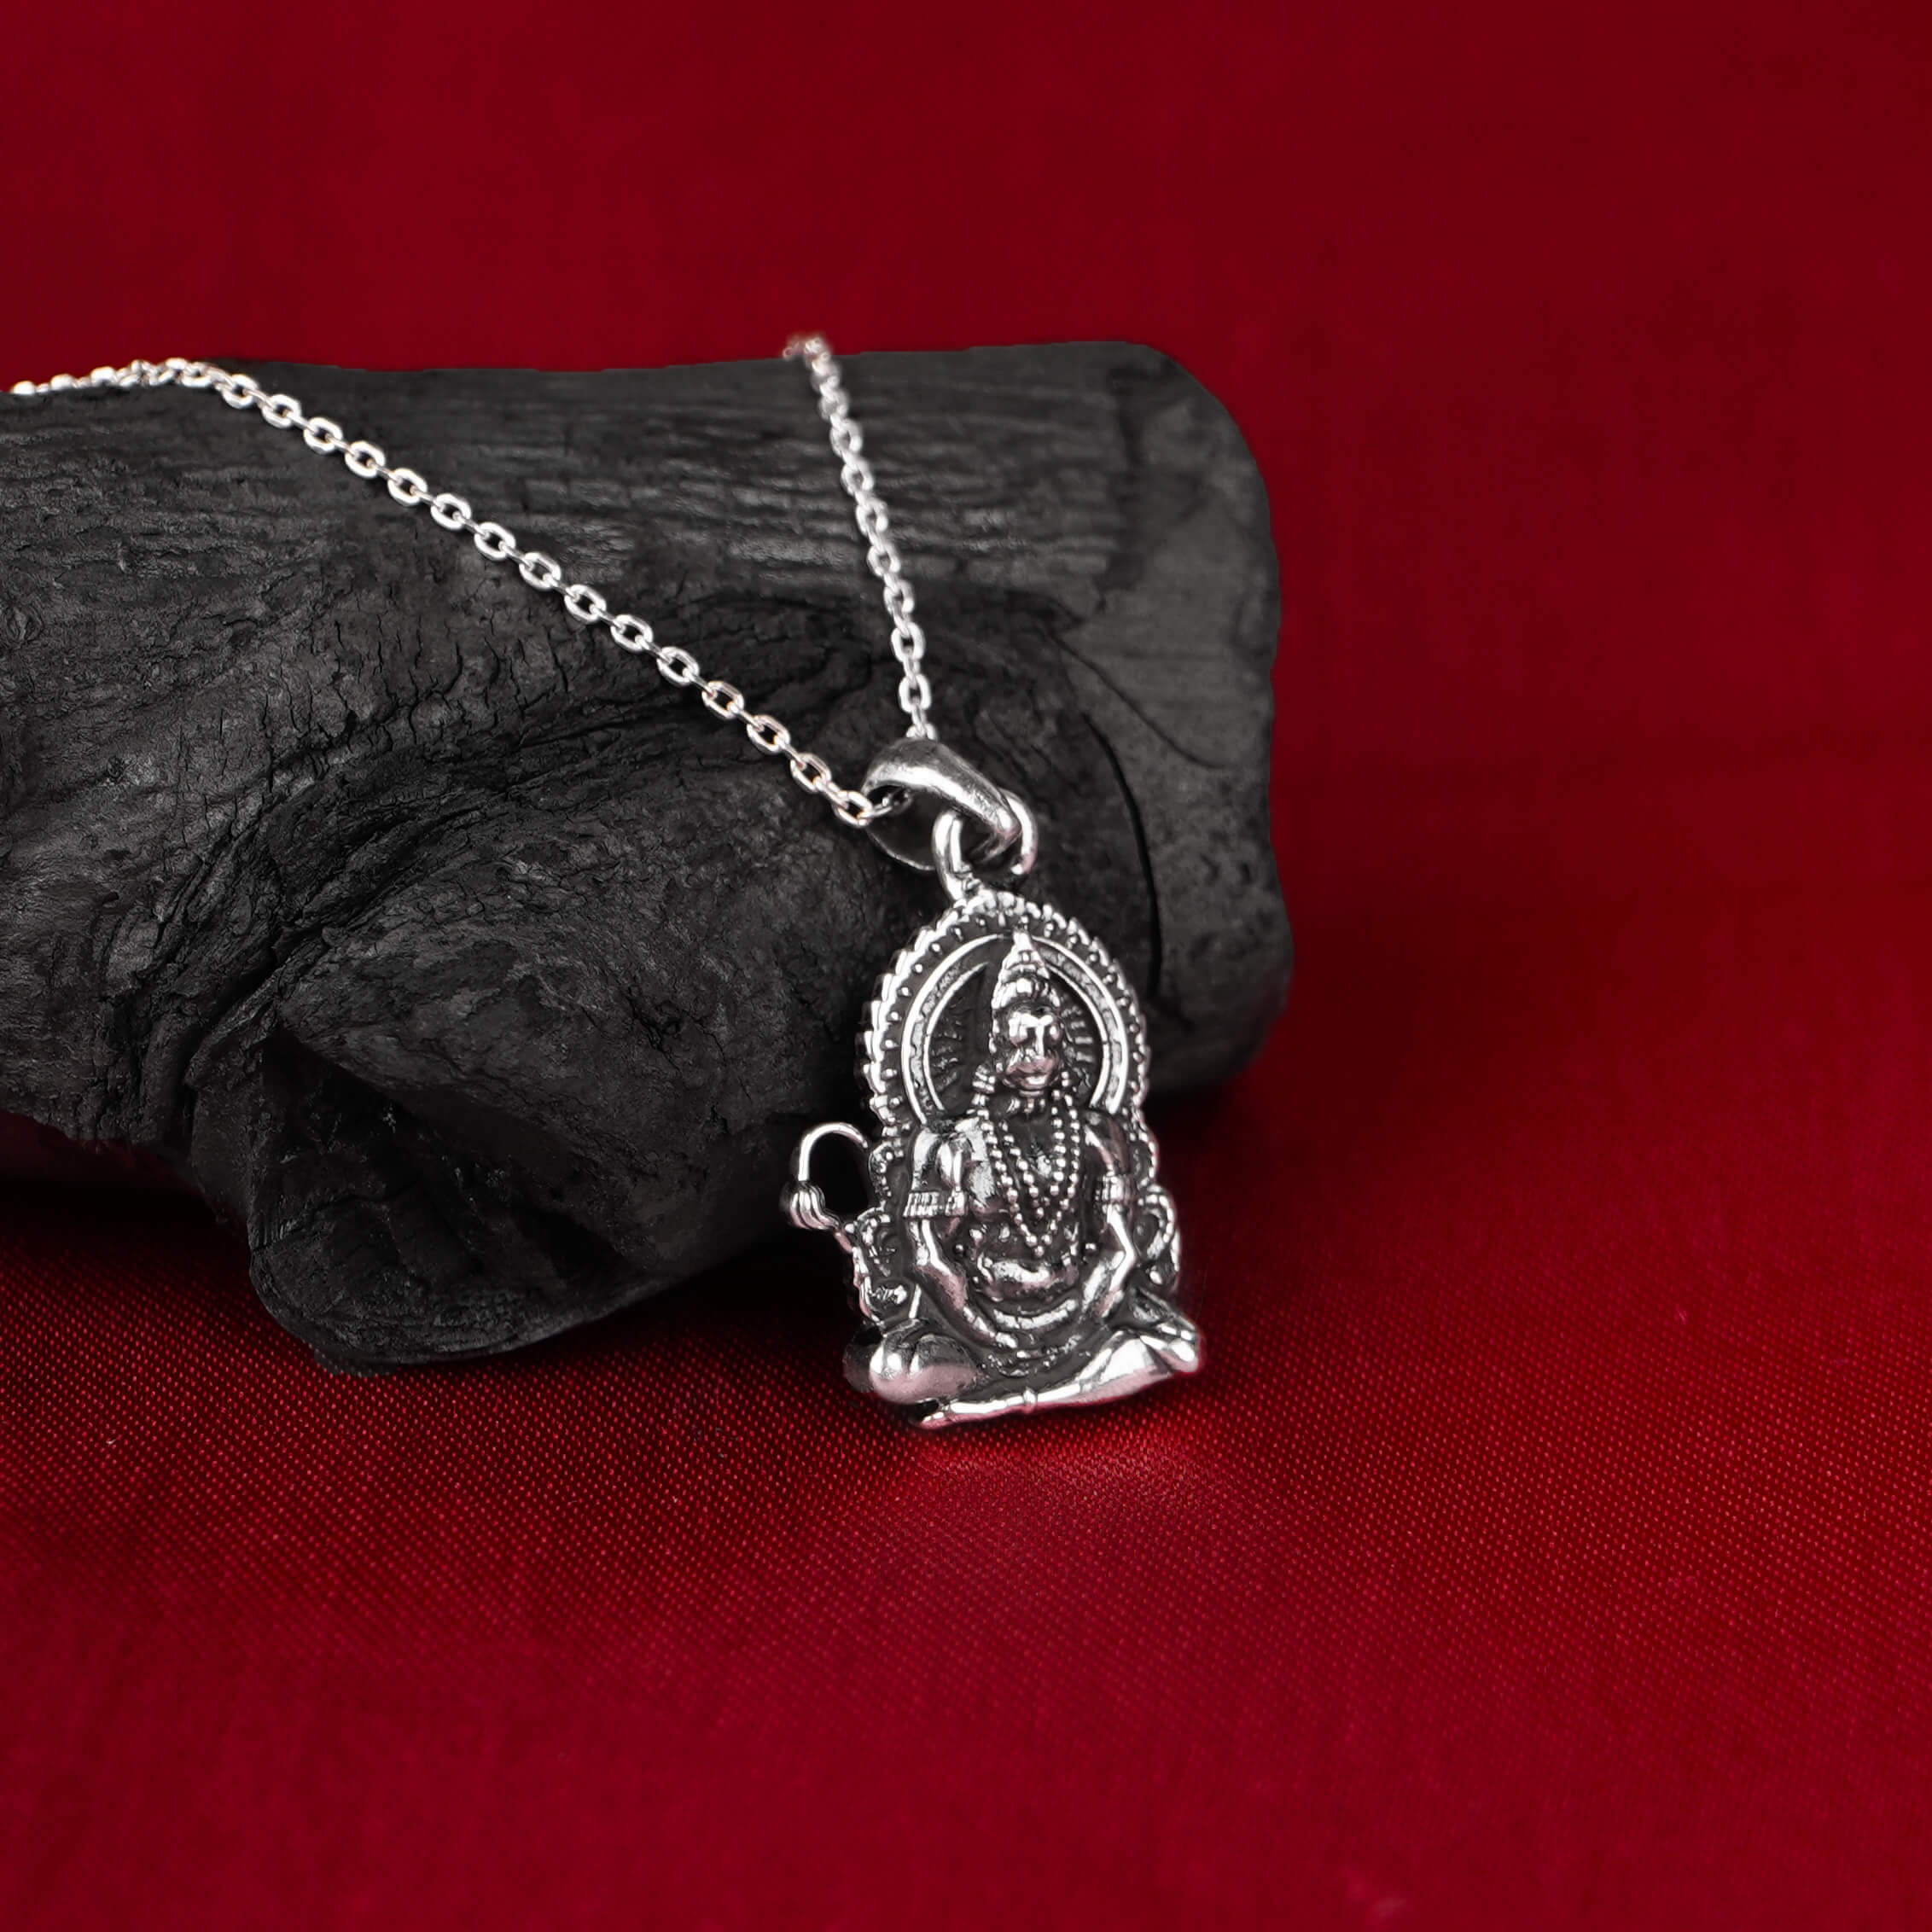 Pawanputra Hanuman Silver Pendant and Necklace for Men and Women